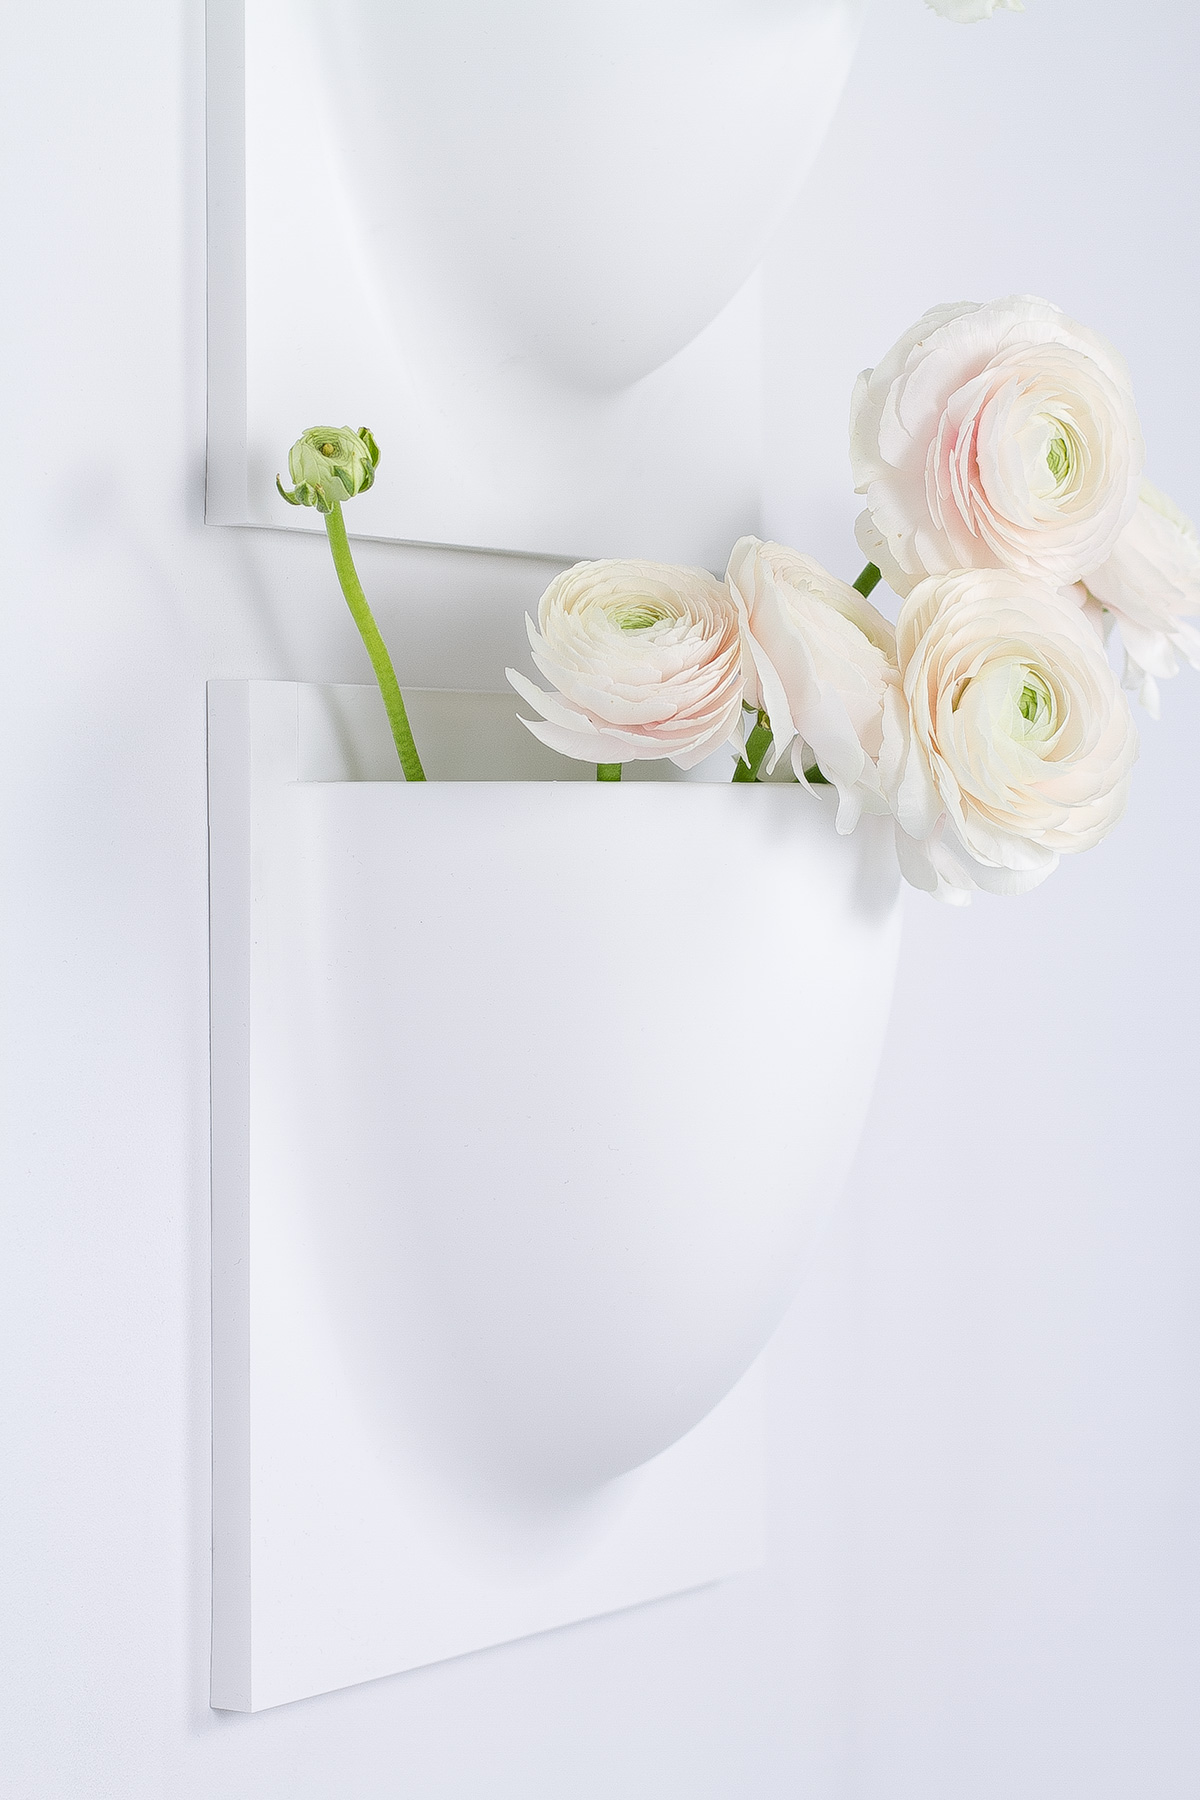 peonies and tulips in VertiPlants vases on the wall, spring flowers, blogpost Lifetimepieces.com